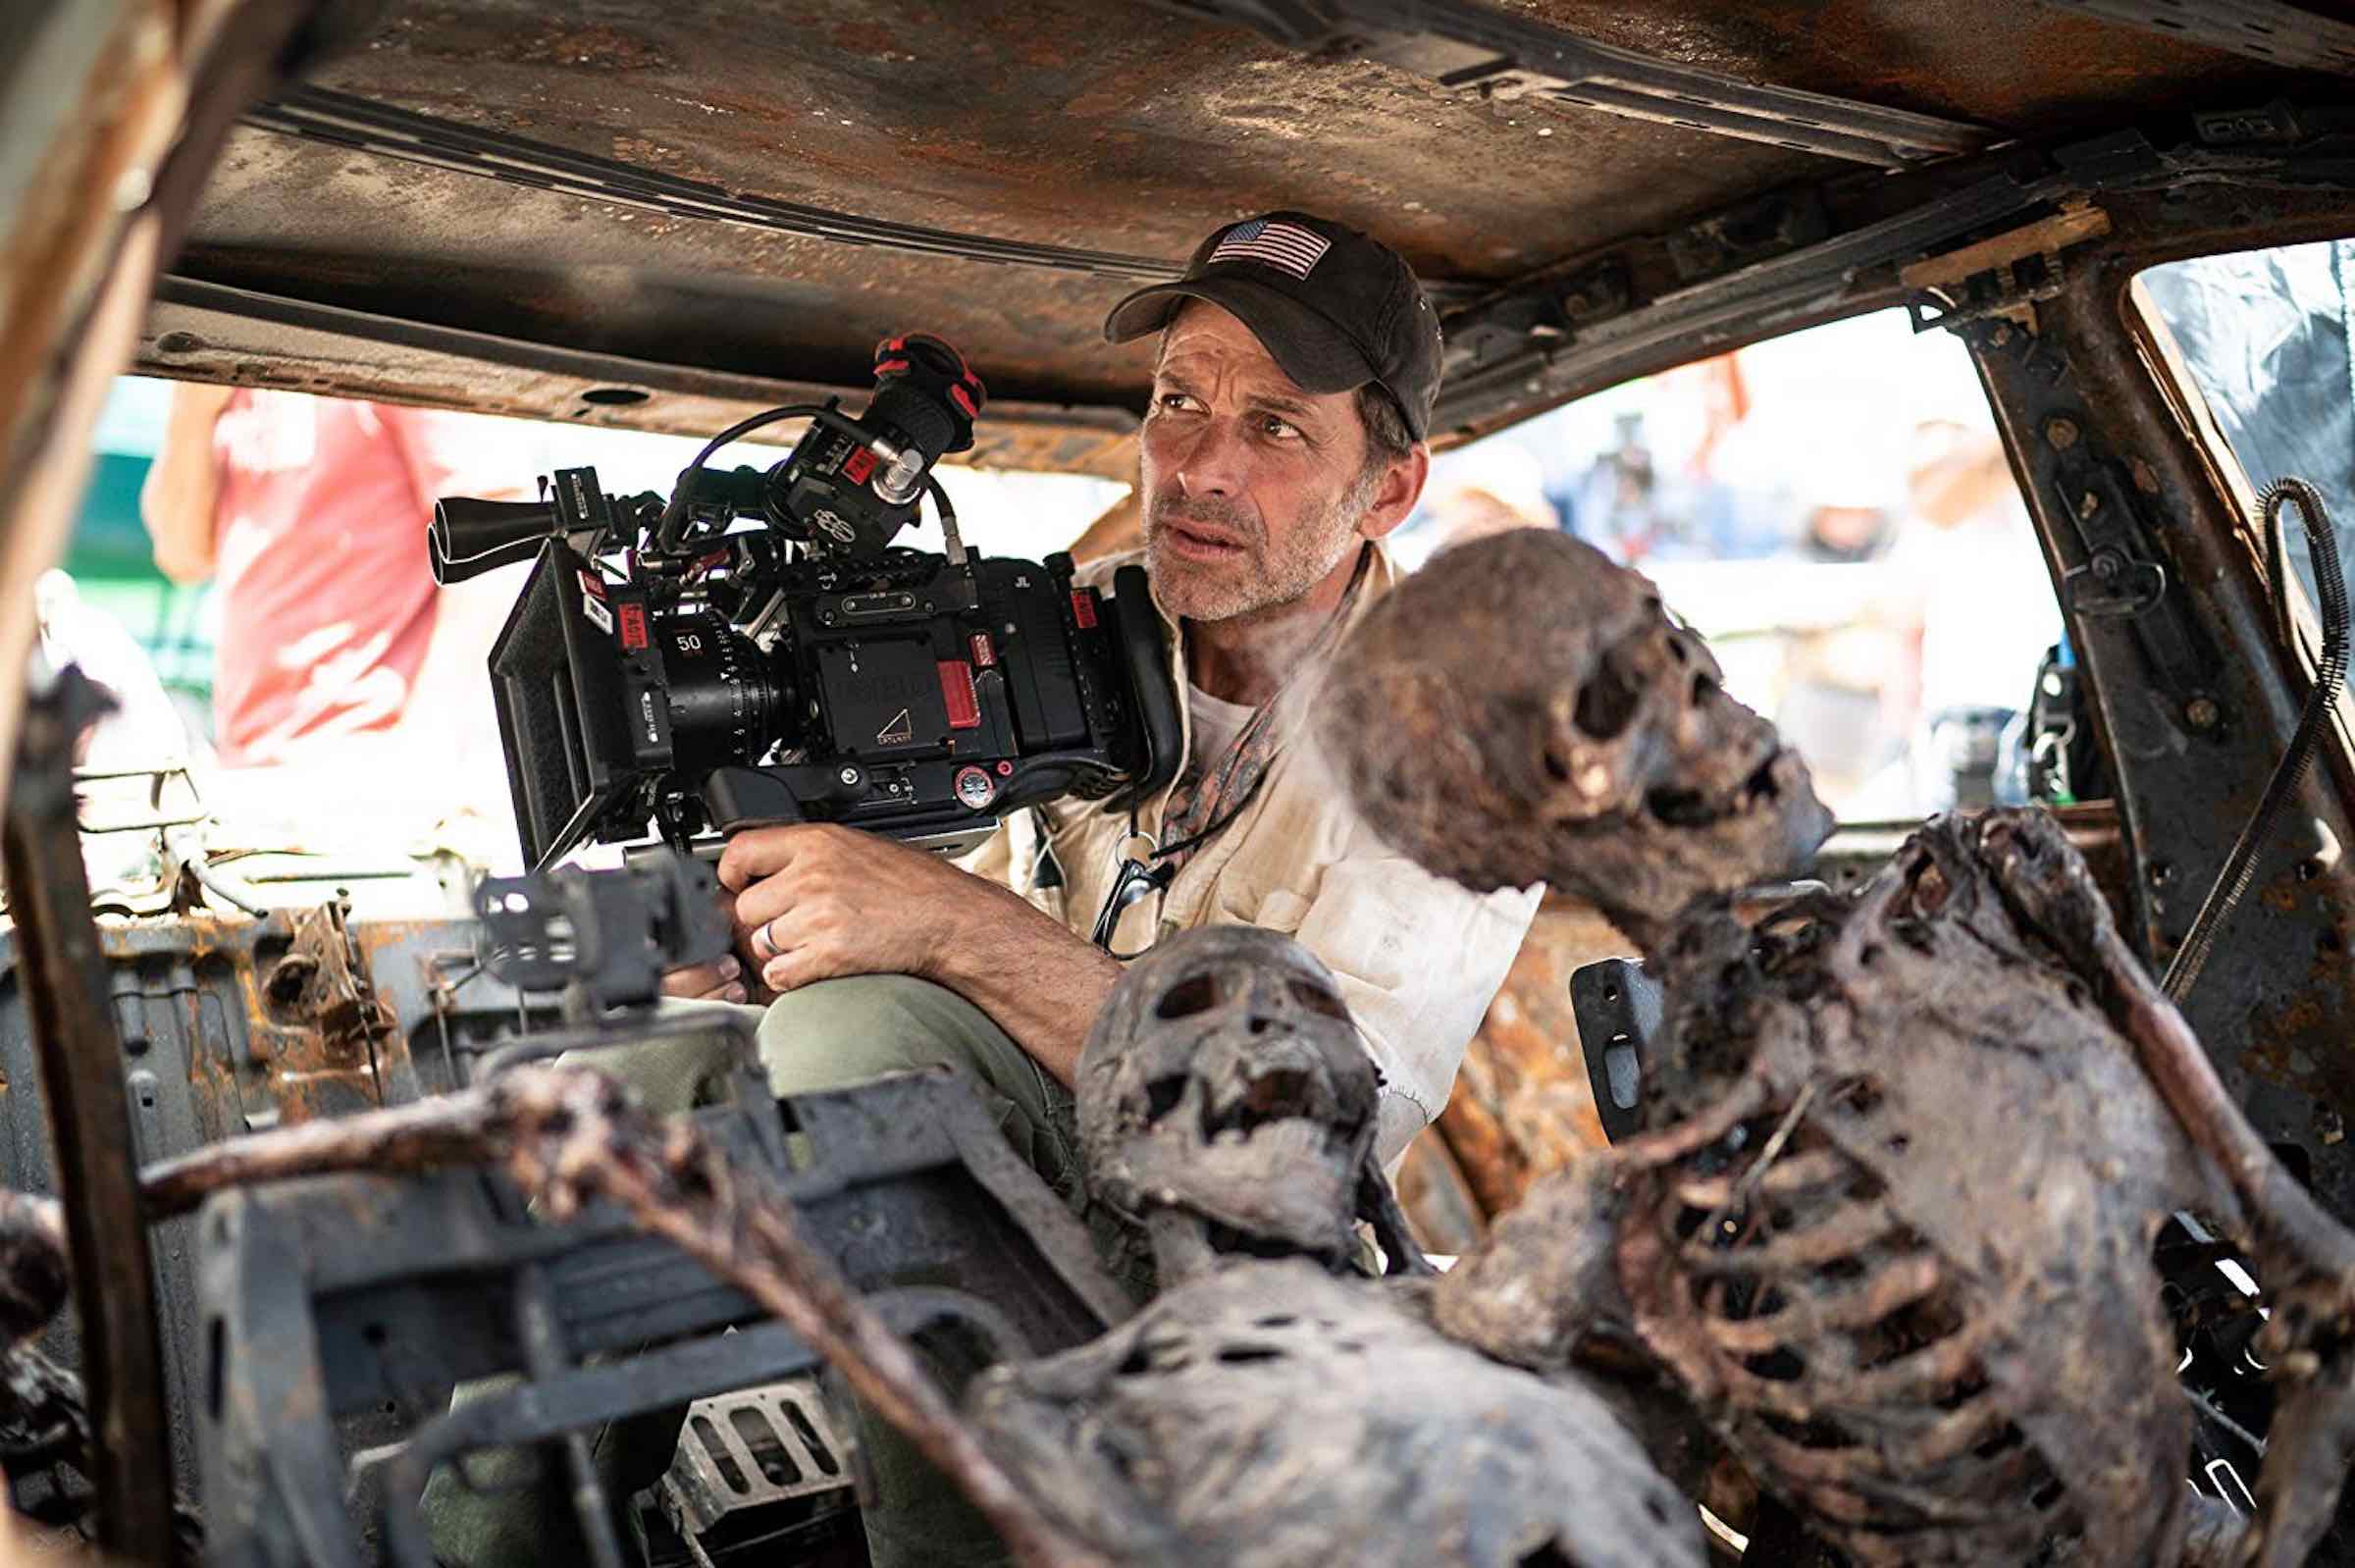 Zack Snyder will be coming back to Hollywood with a bang, planning to release 'Army of the Dead' in 2020 on Netflix. Here's what we know.